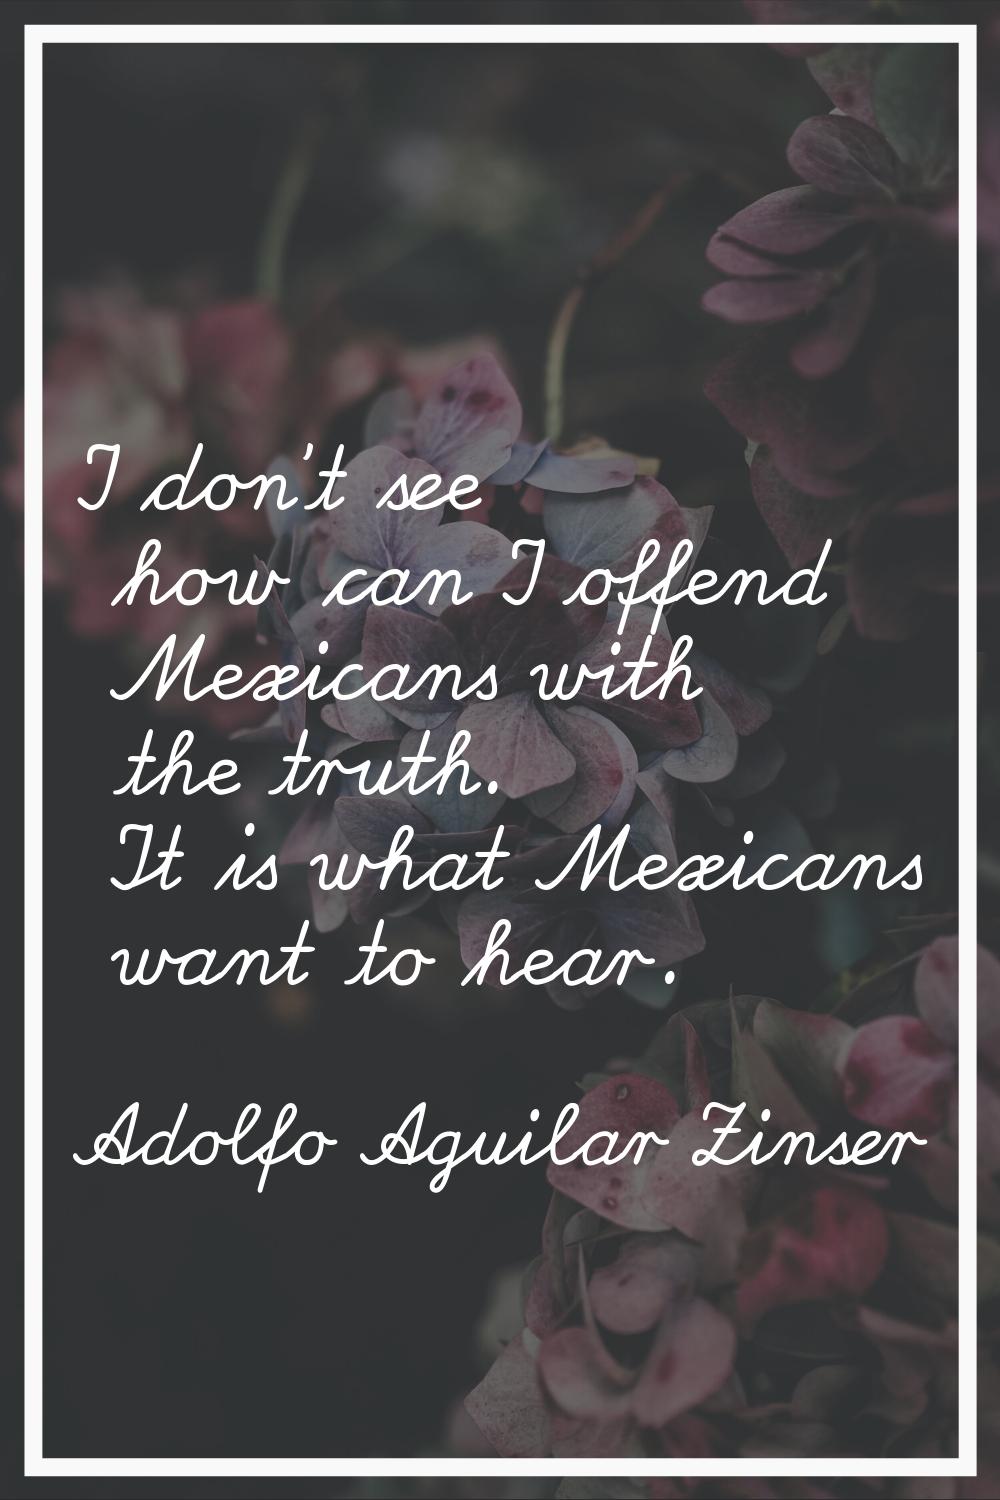 I don't see how can I offend Mexicans with the truth. It is what Mexicans want to hear.